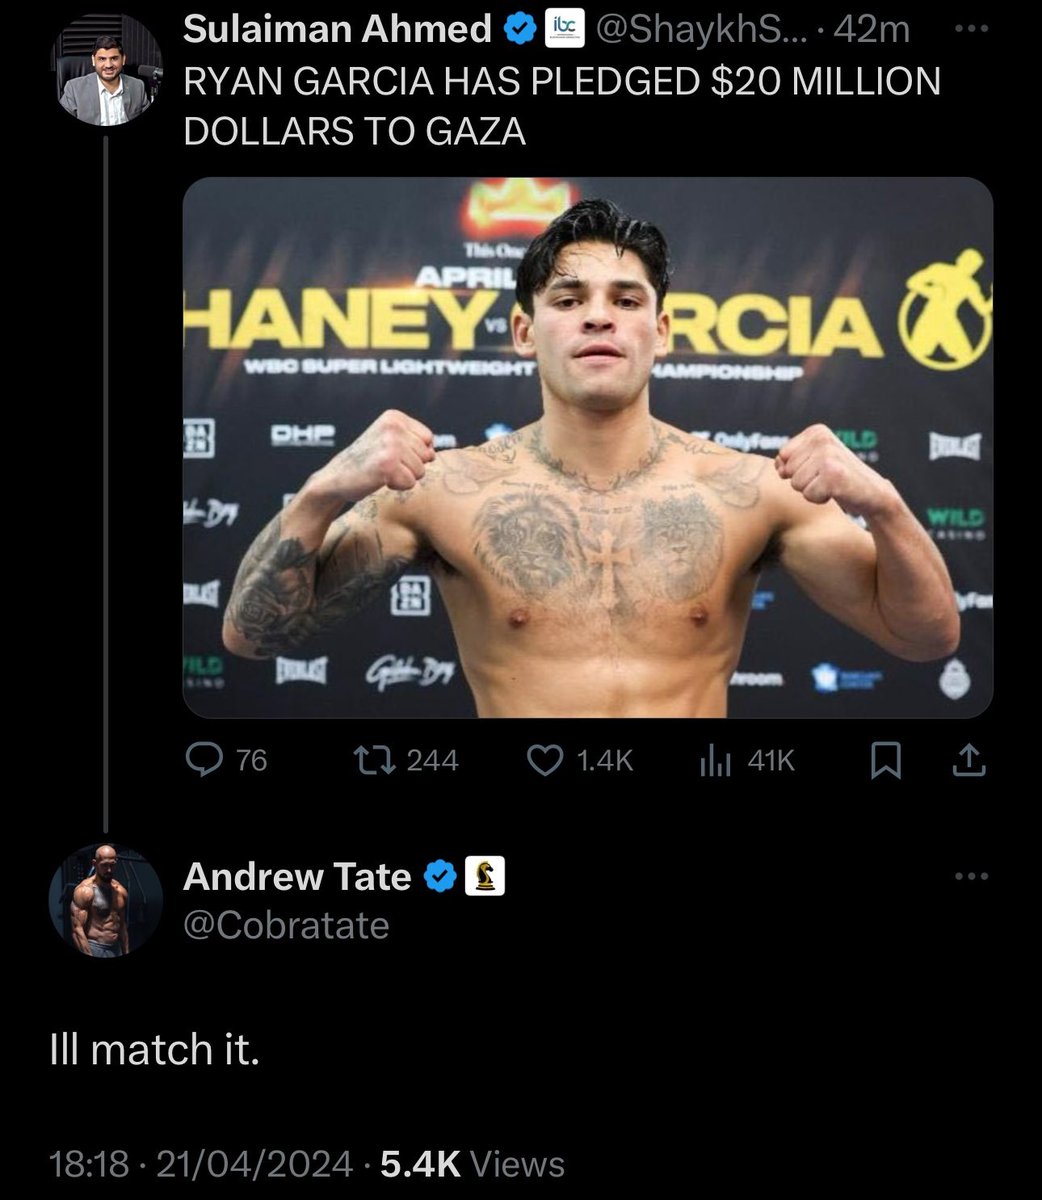 I will also match it.

That is $60 million. 

I ask for my followers to also match it. 

Remember, $20 million is nothing to you but to the people of Gaza it is life-changing.